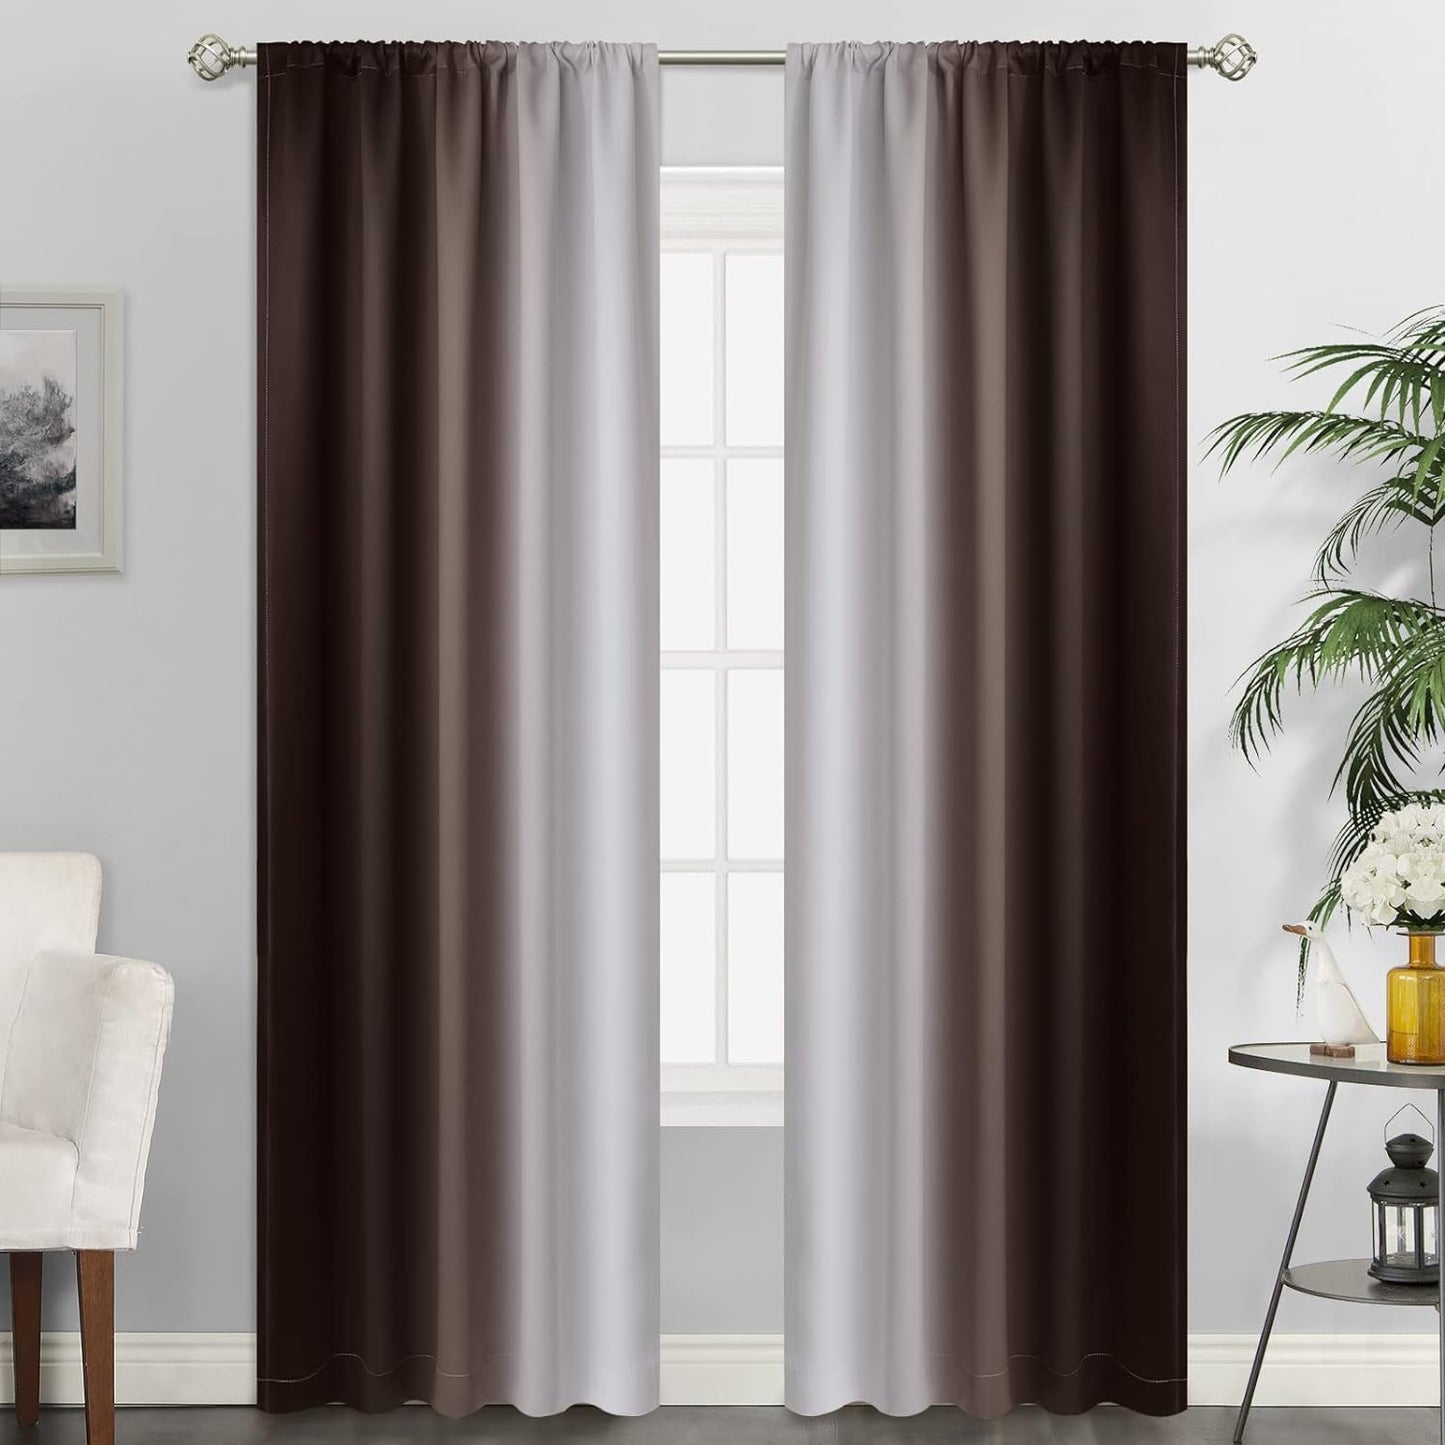 Simplehome Ombre Room Darkening Curtains for Bedroom, Light Blocking Gradient Purple to Greyish White Thermal Insulated Rod Pocket Window Curtains Drapes for Living Room,2 Panels, 52X84 Inches Length  SimpleHome Brown 52W X 90L / 2 Panels 